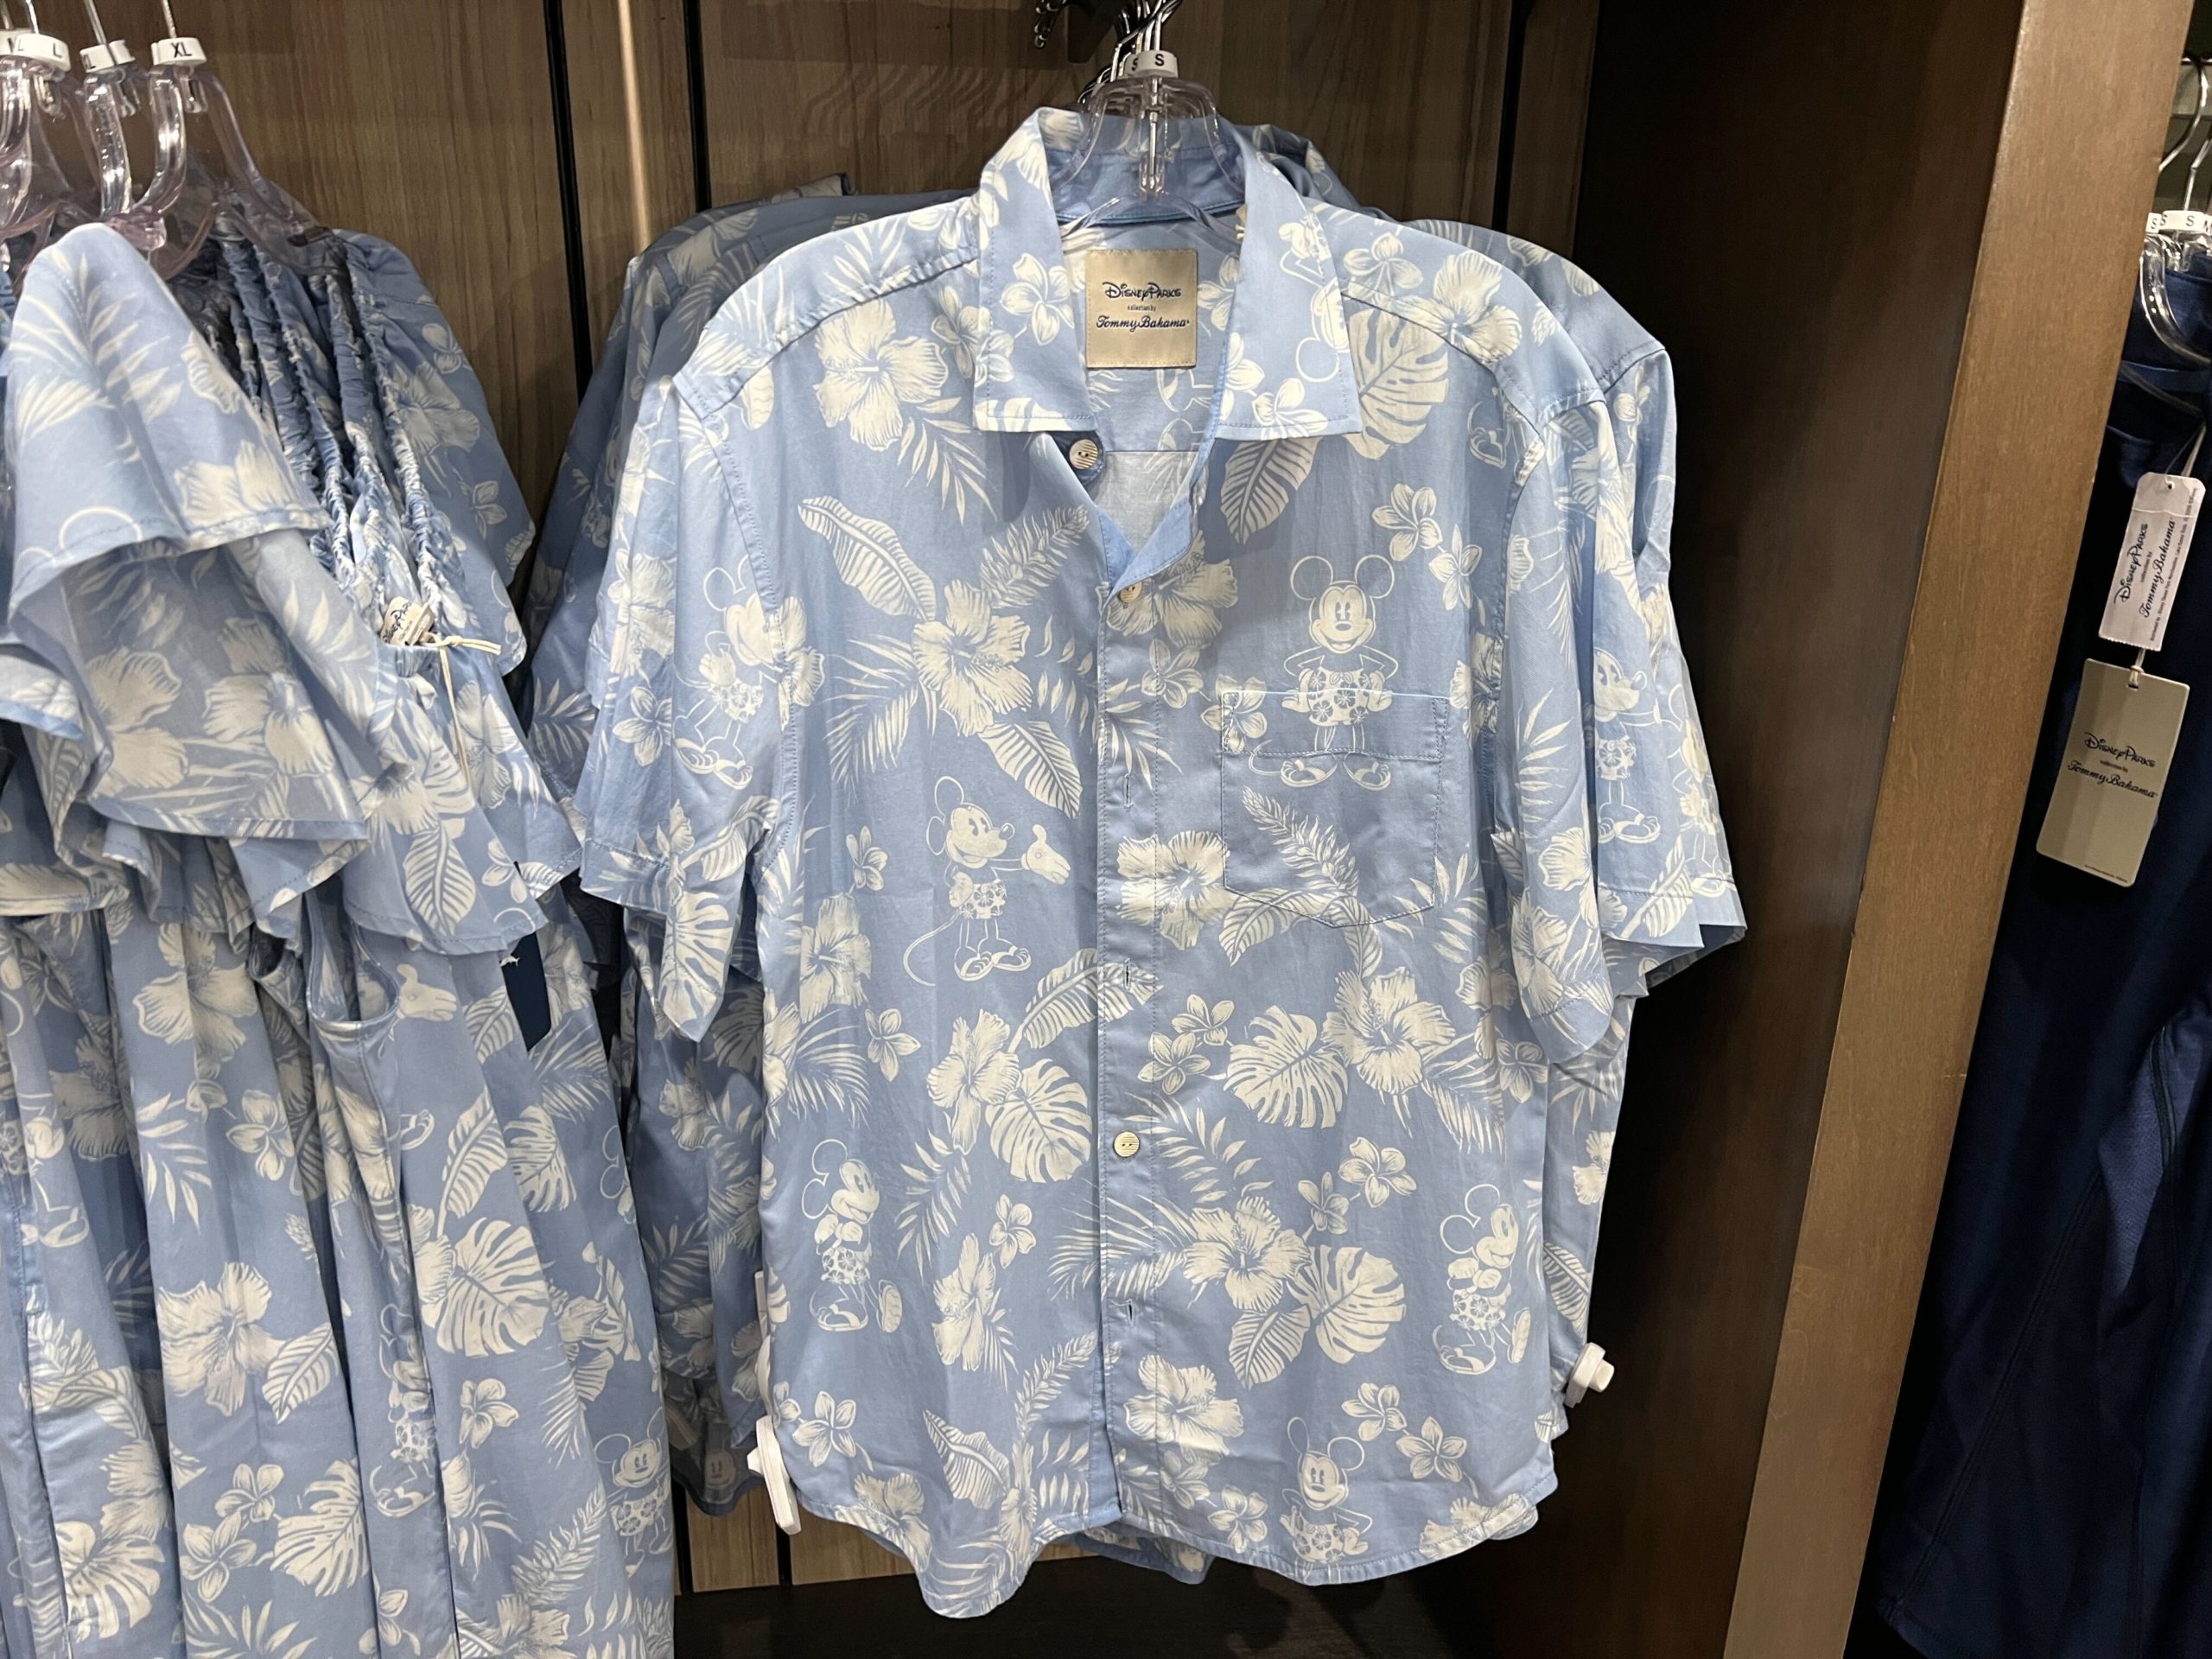 Embrace Your Vacation Style With New Tommy Bahama Mickey Mouse Shirts  Available at Walt Disney World - WDW News Today